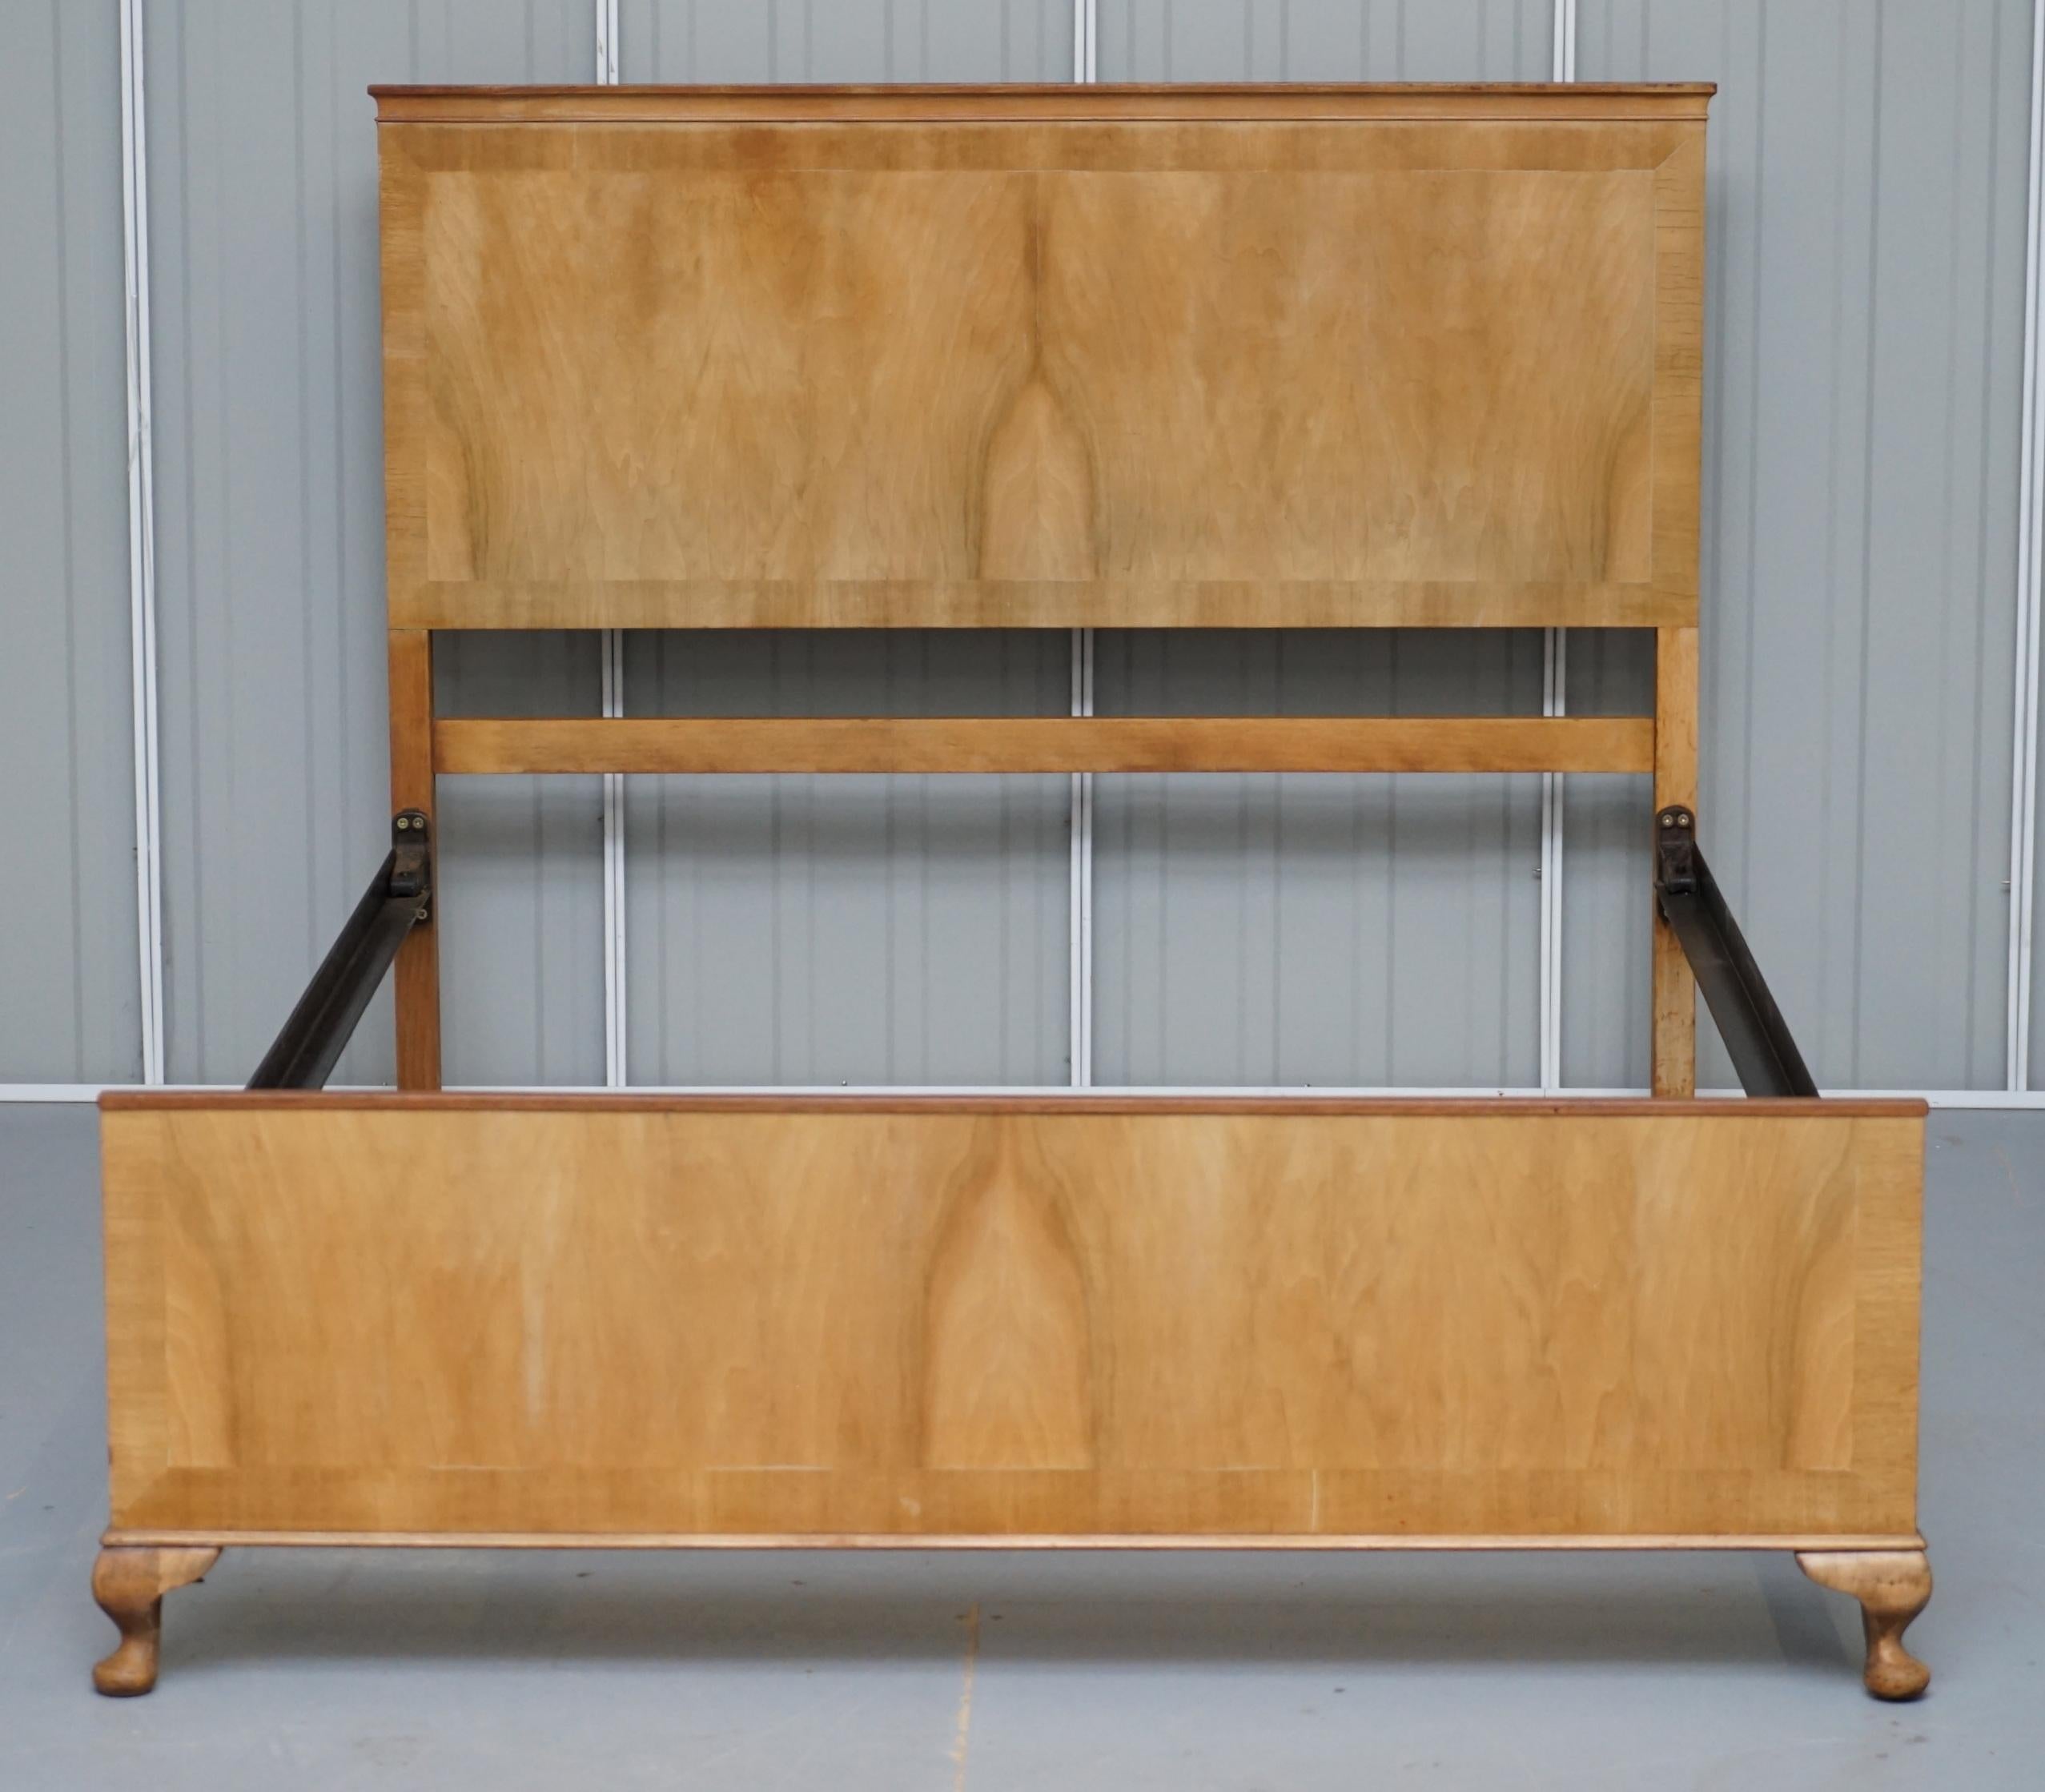 We are delighted to offer for sale this lovely original 1920s Art Deco light walnut bed frame or bedstead

This one is in very good order, it’s a popular Art Deco style, the frame is all walnut, they just don’t make beds like this anymore

We